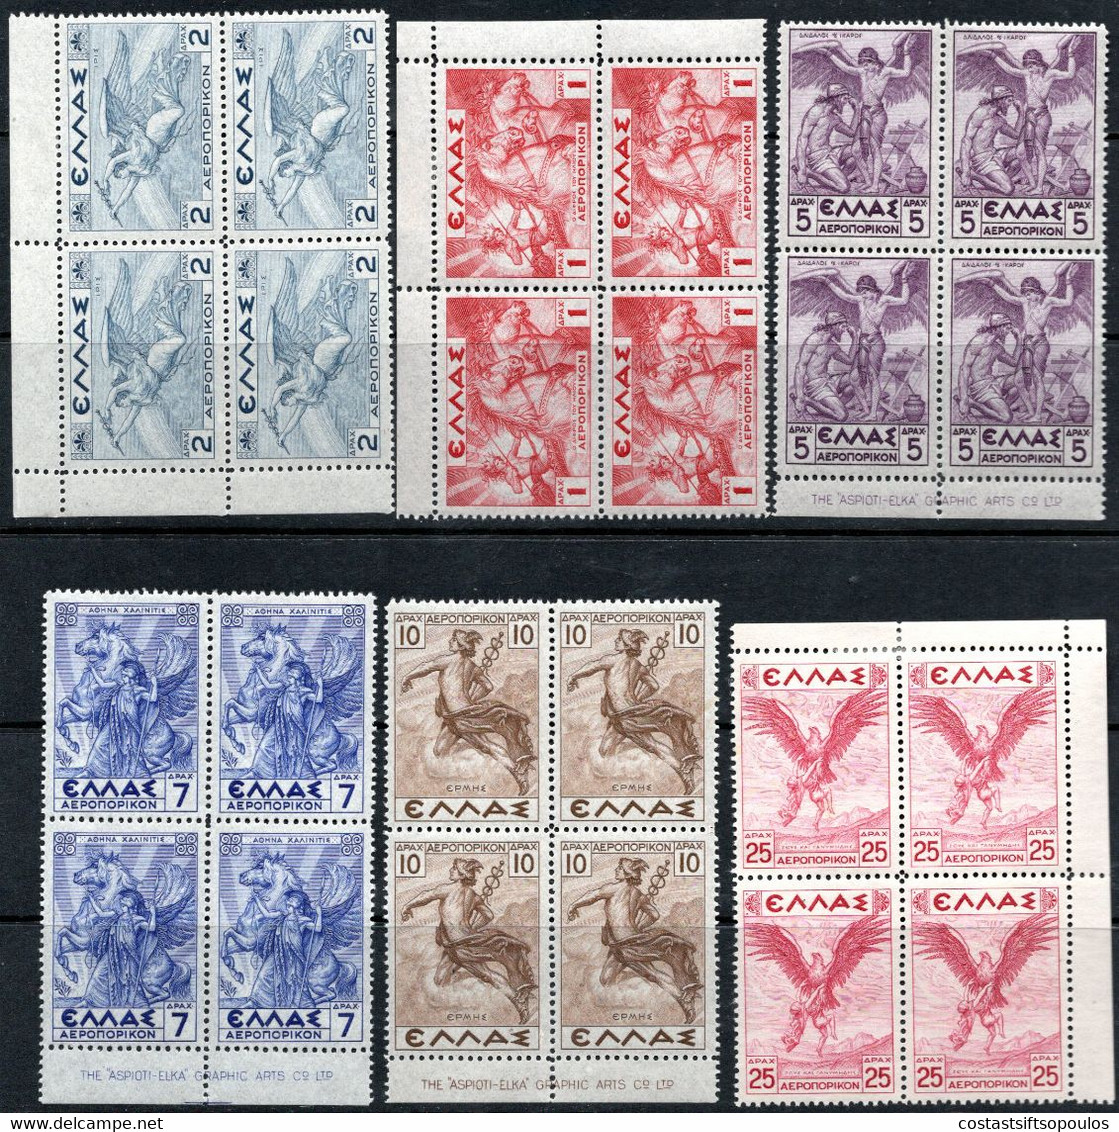 941.GREECE.1935 MYTHOLOGICAL ISSUE # 22-30 BLOCKS OF 4 (3 MNH,1 MH)4 SCANS - Ungebraucht